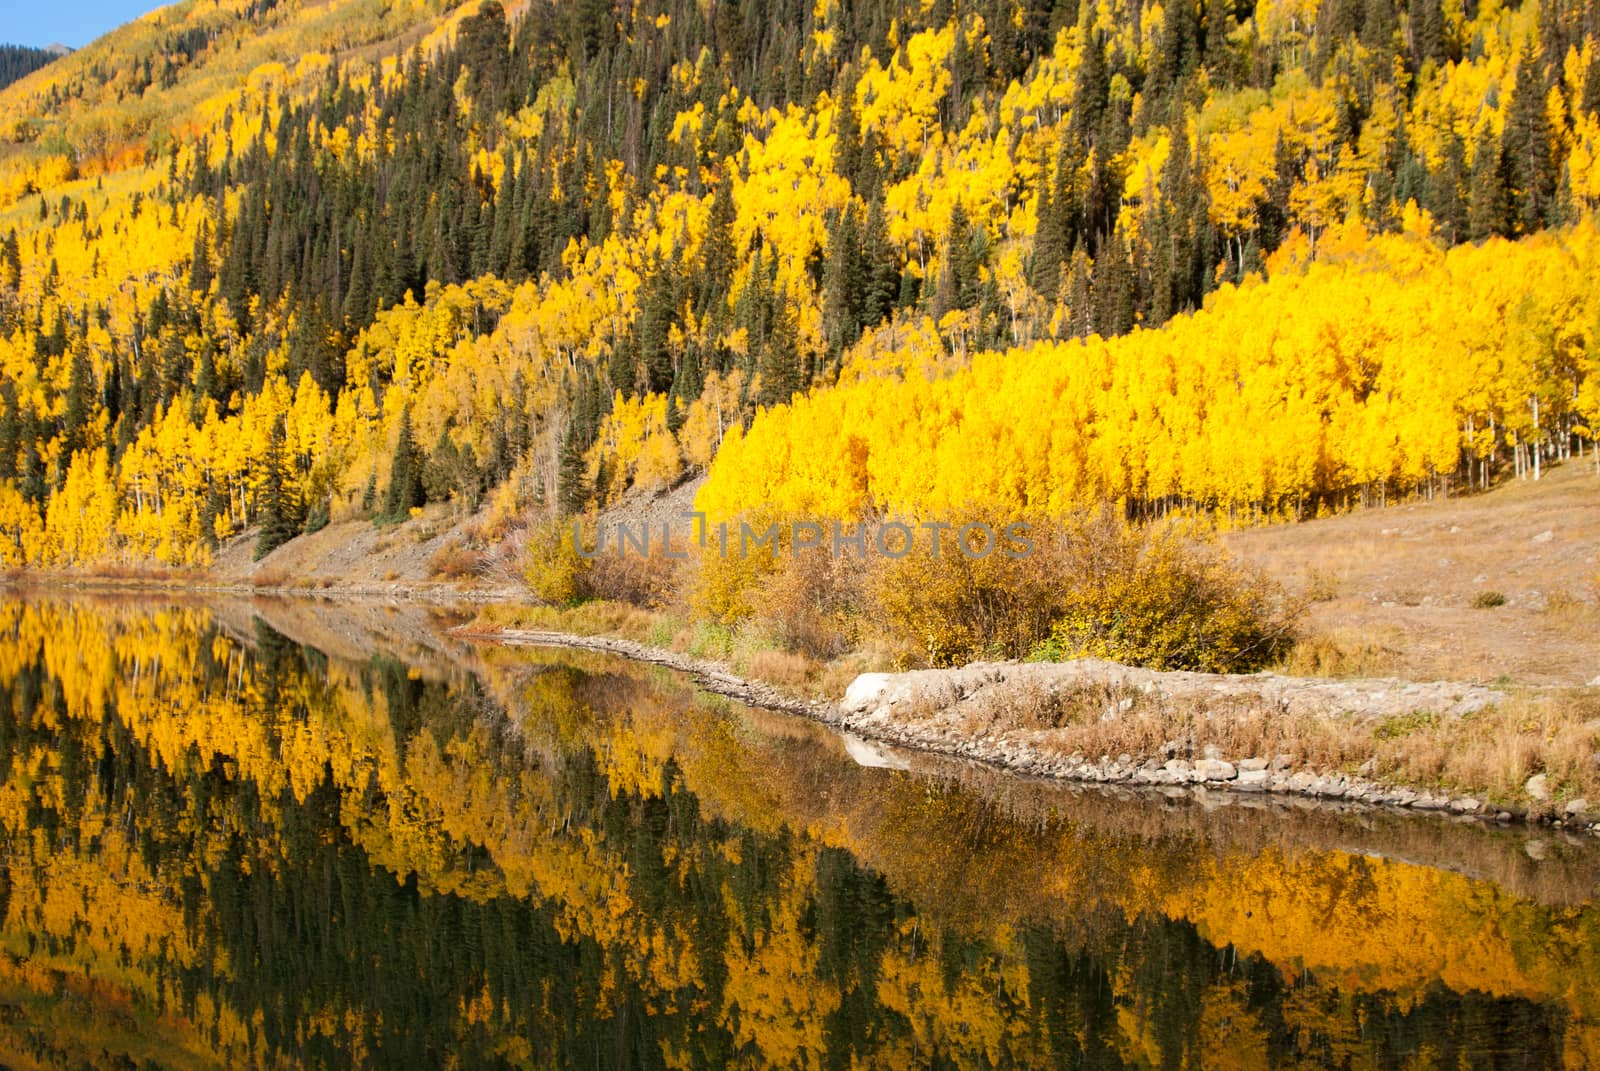 Lakeside reflections of Colorado aspens in Fall